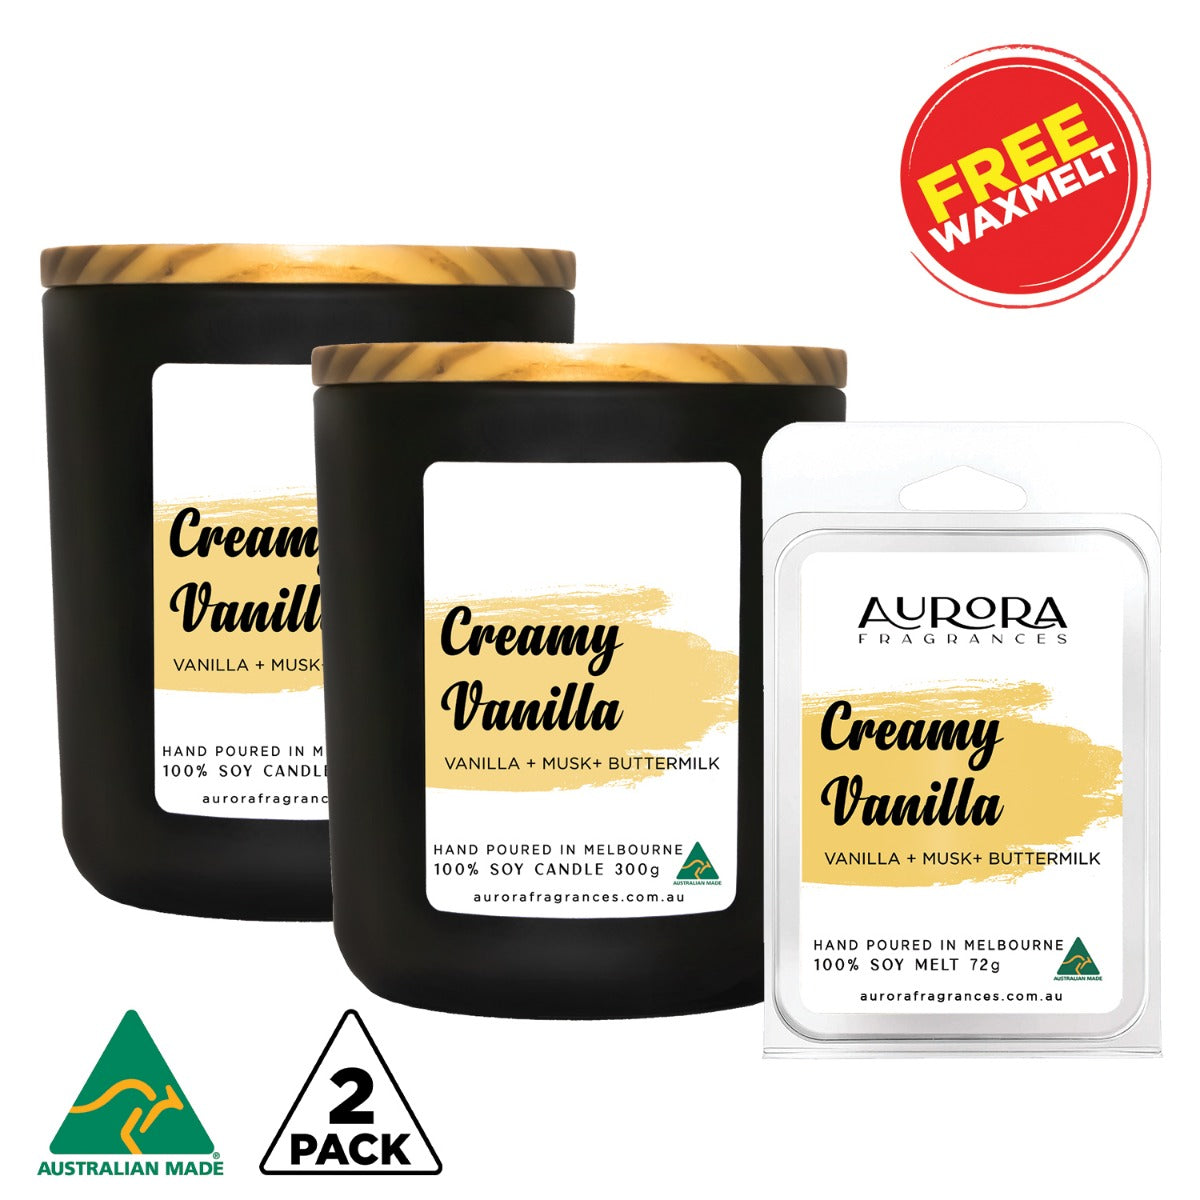 Aurora Creamy Vanilla Scented Soy Candle Australian Made 300g 2 Pack